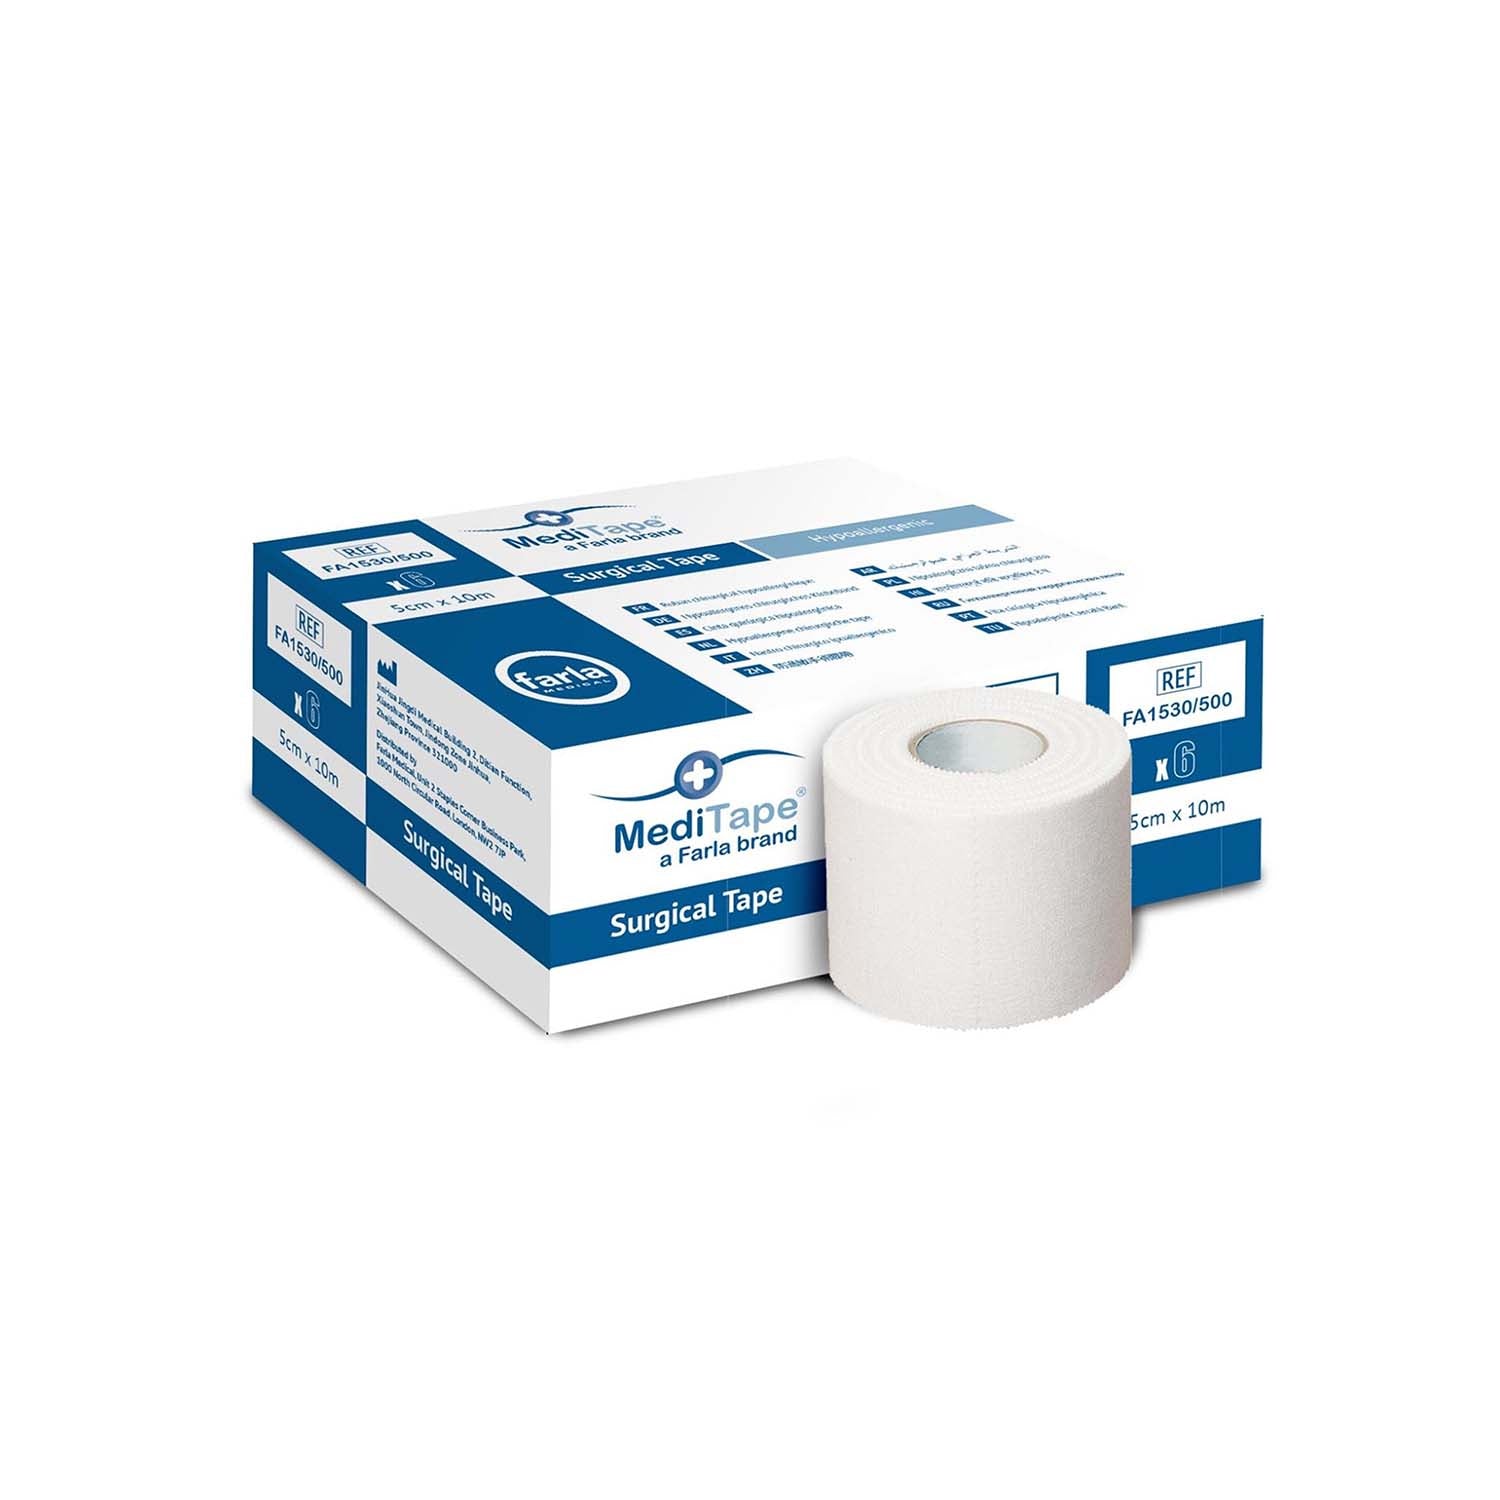 MediTape Hypoallergenic Surgical Tape | 5cm x 10m | Pack of 6